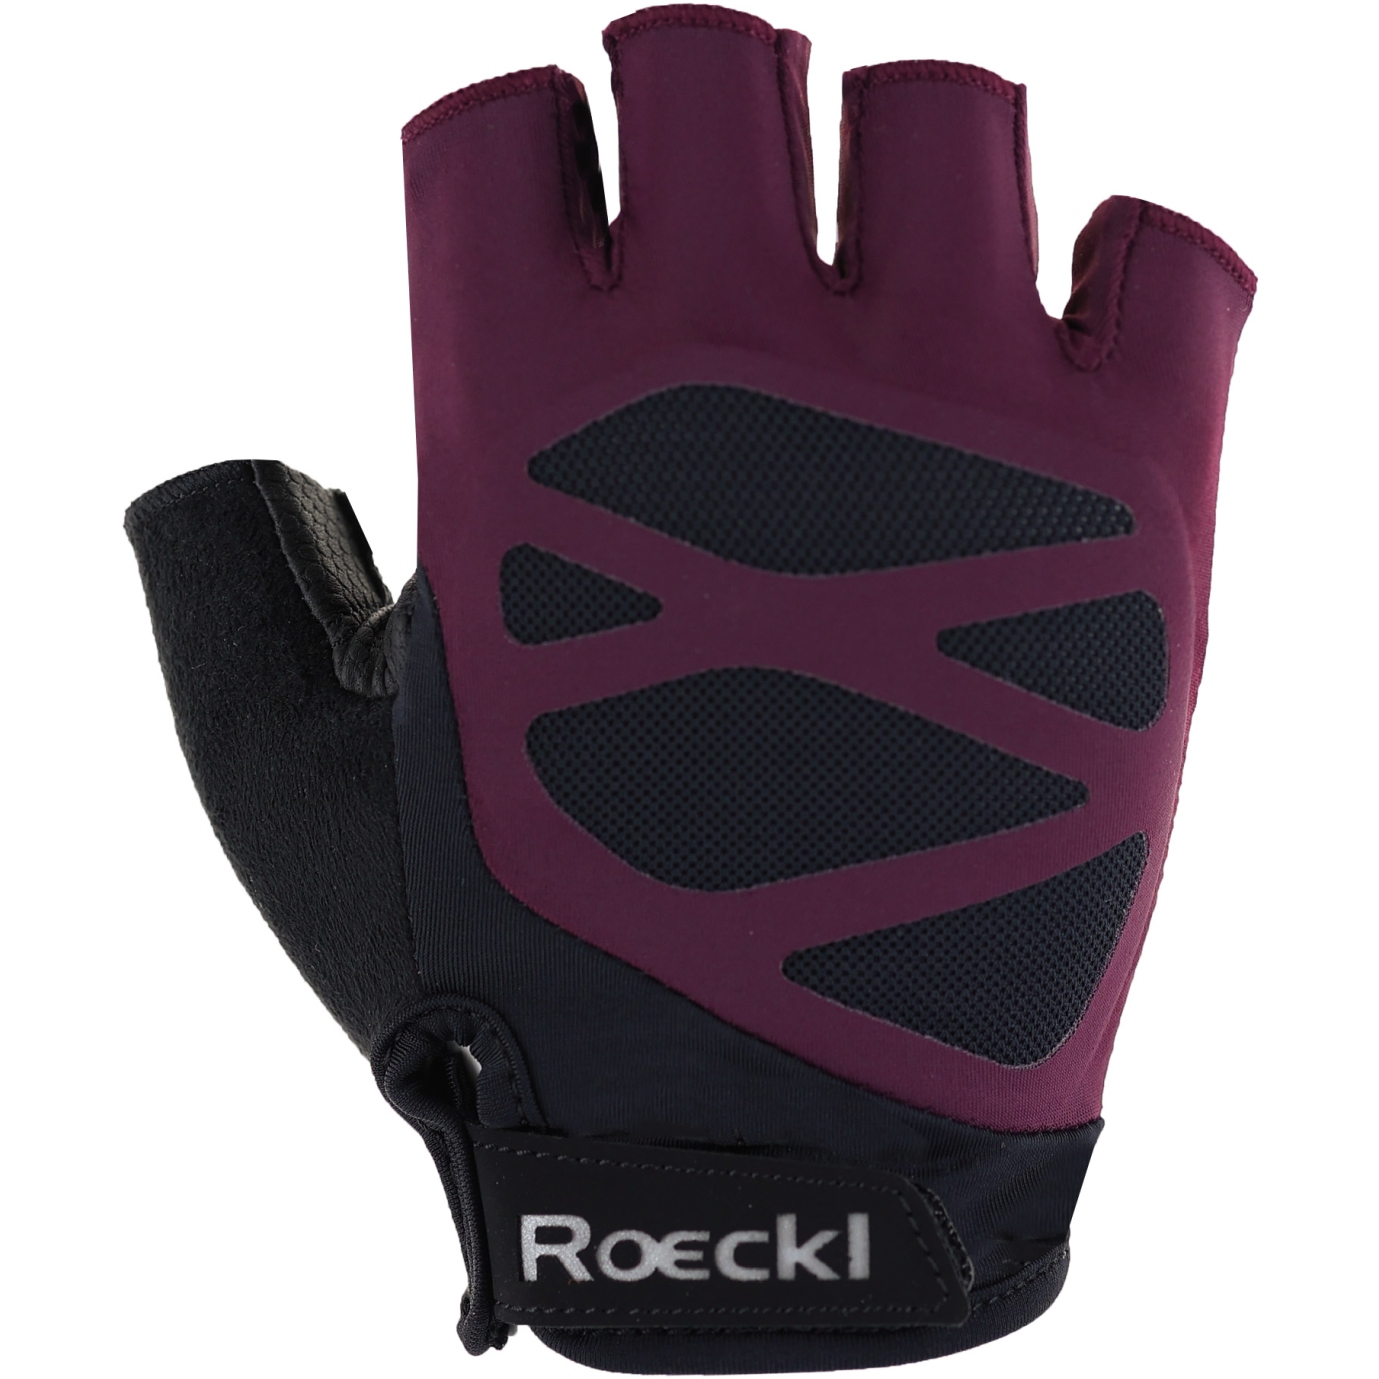 Picture of Roeckl Sports Iton Cycling Gloves - grape wine 4985